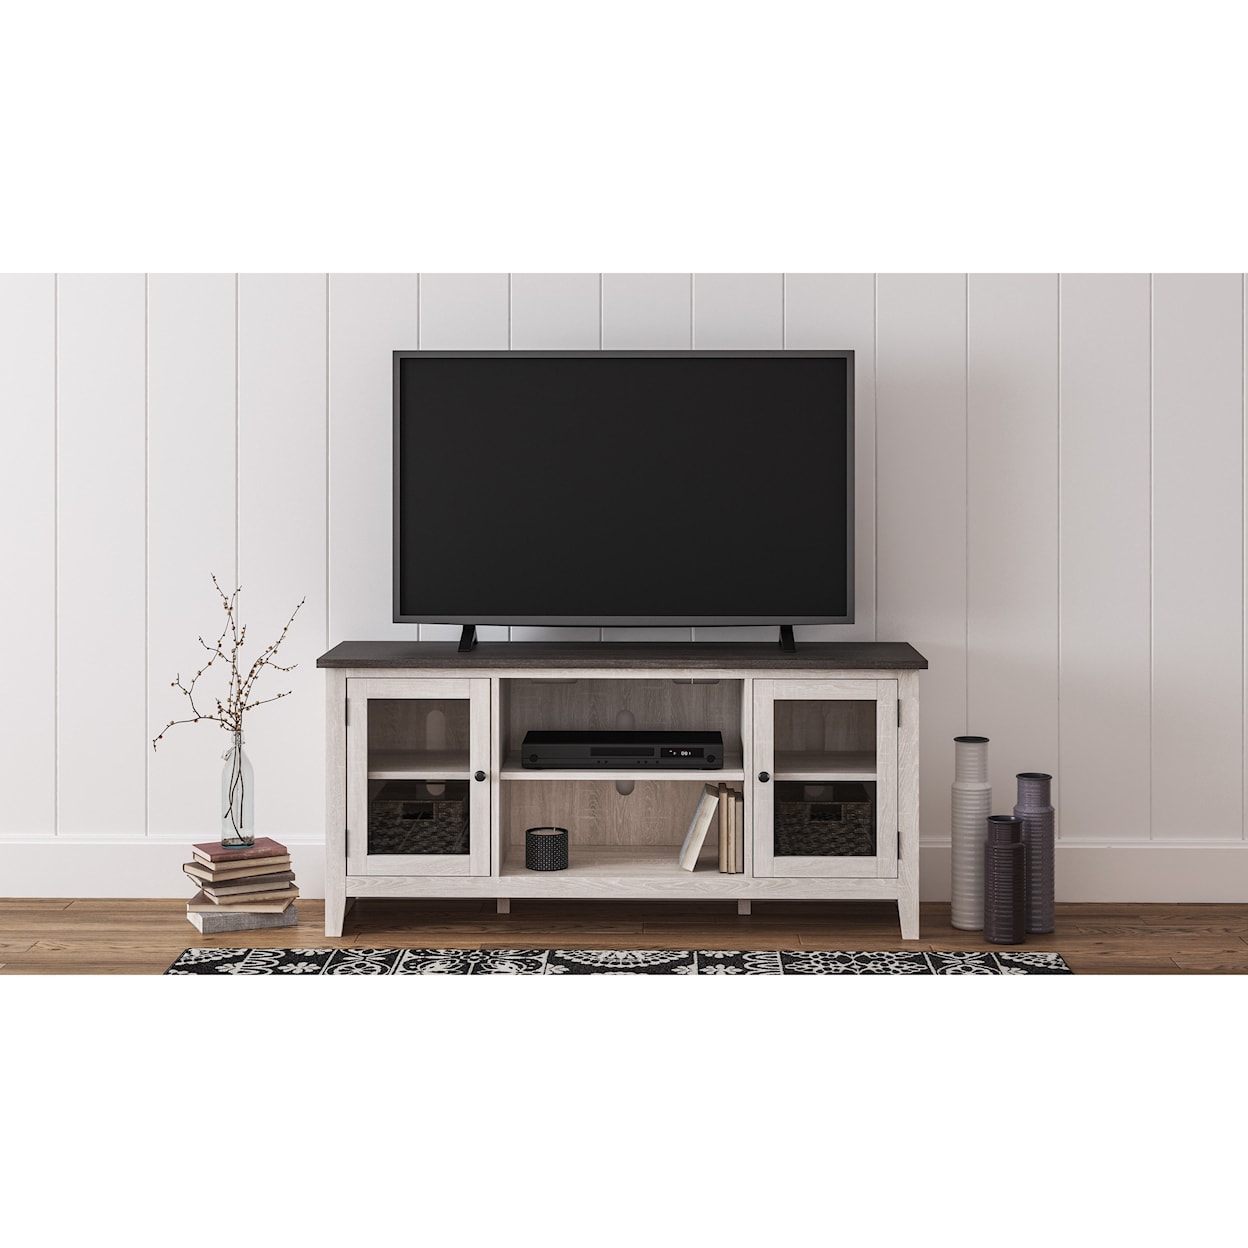 StyleLine DRONE DRONE1 Large TV Stand